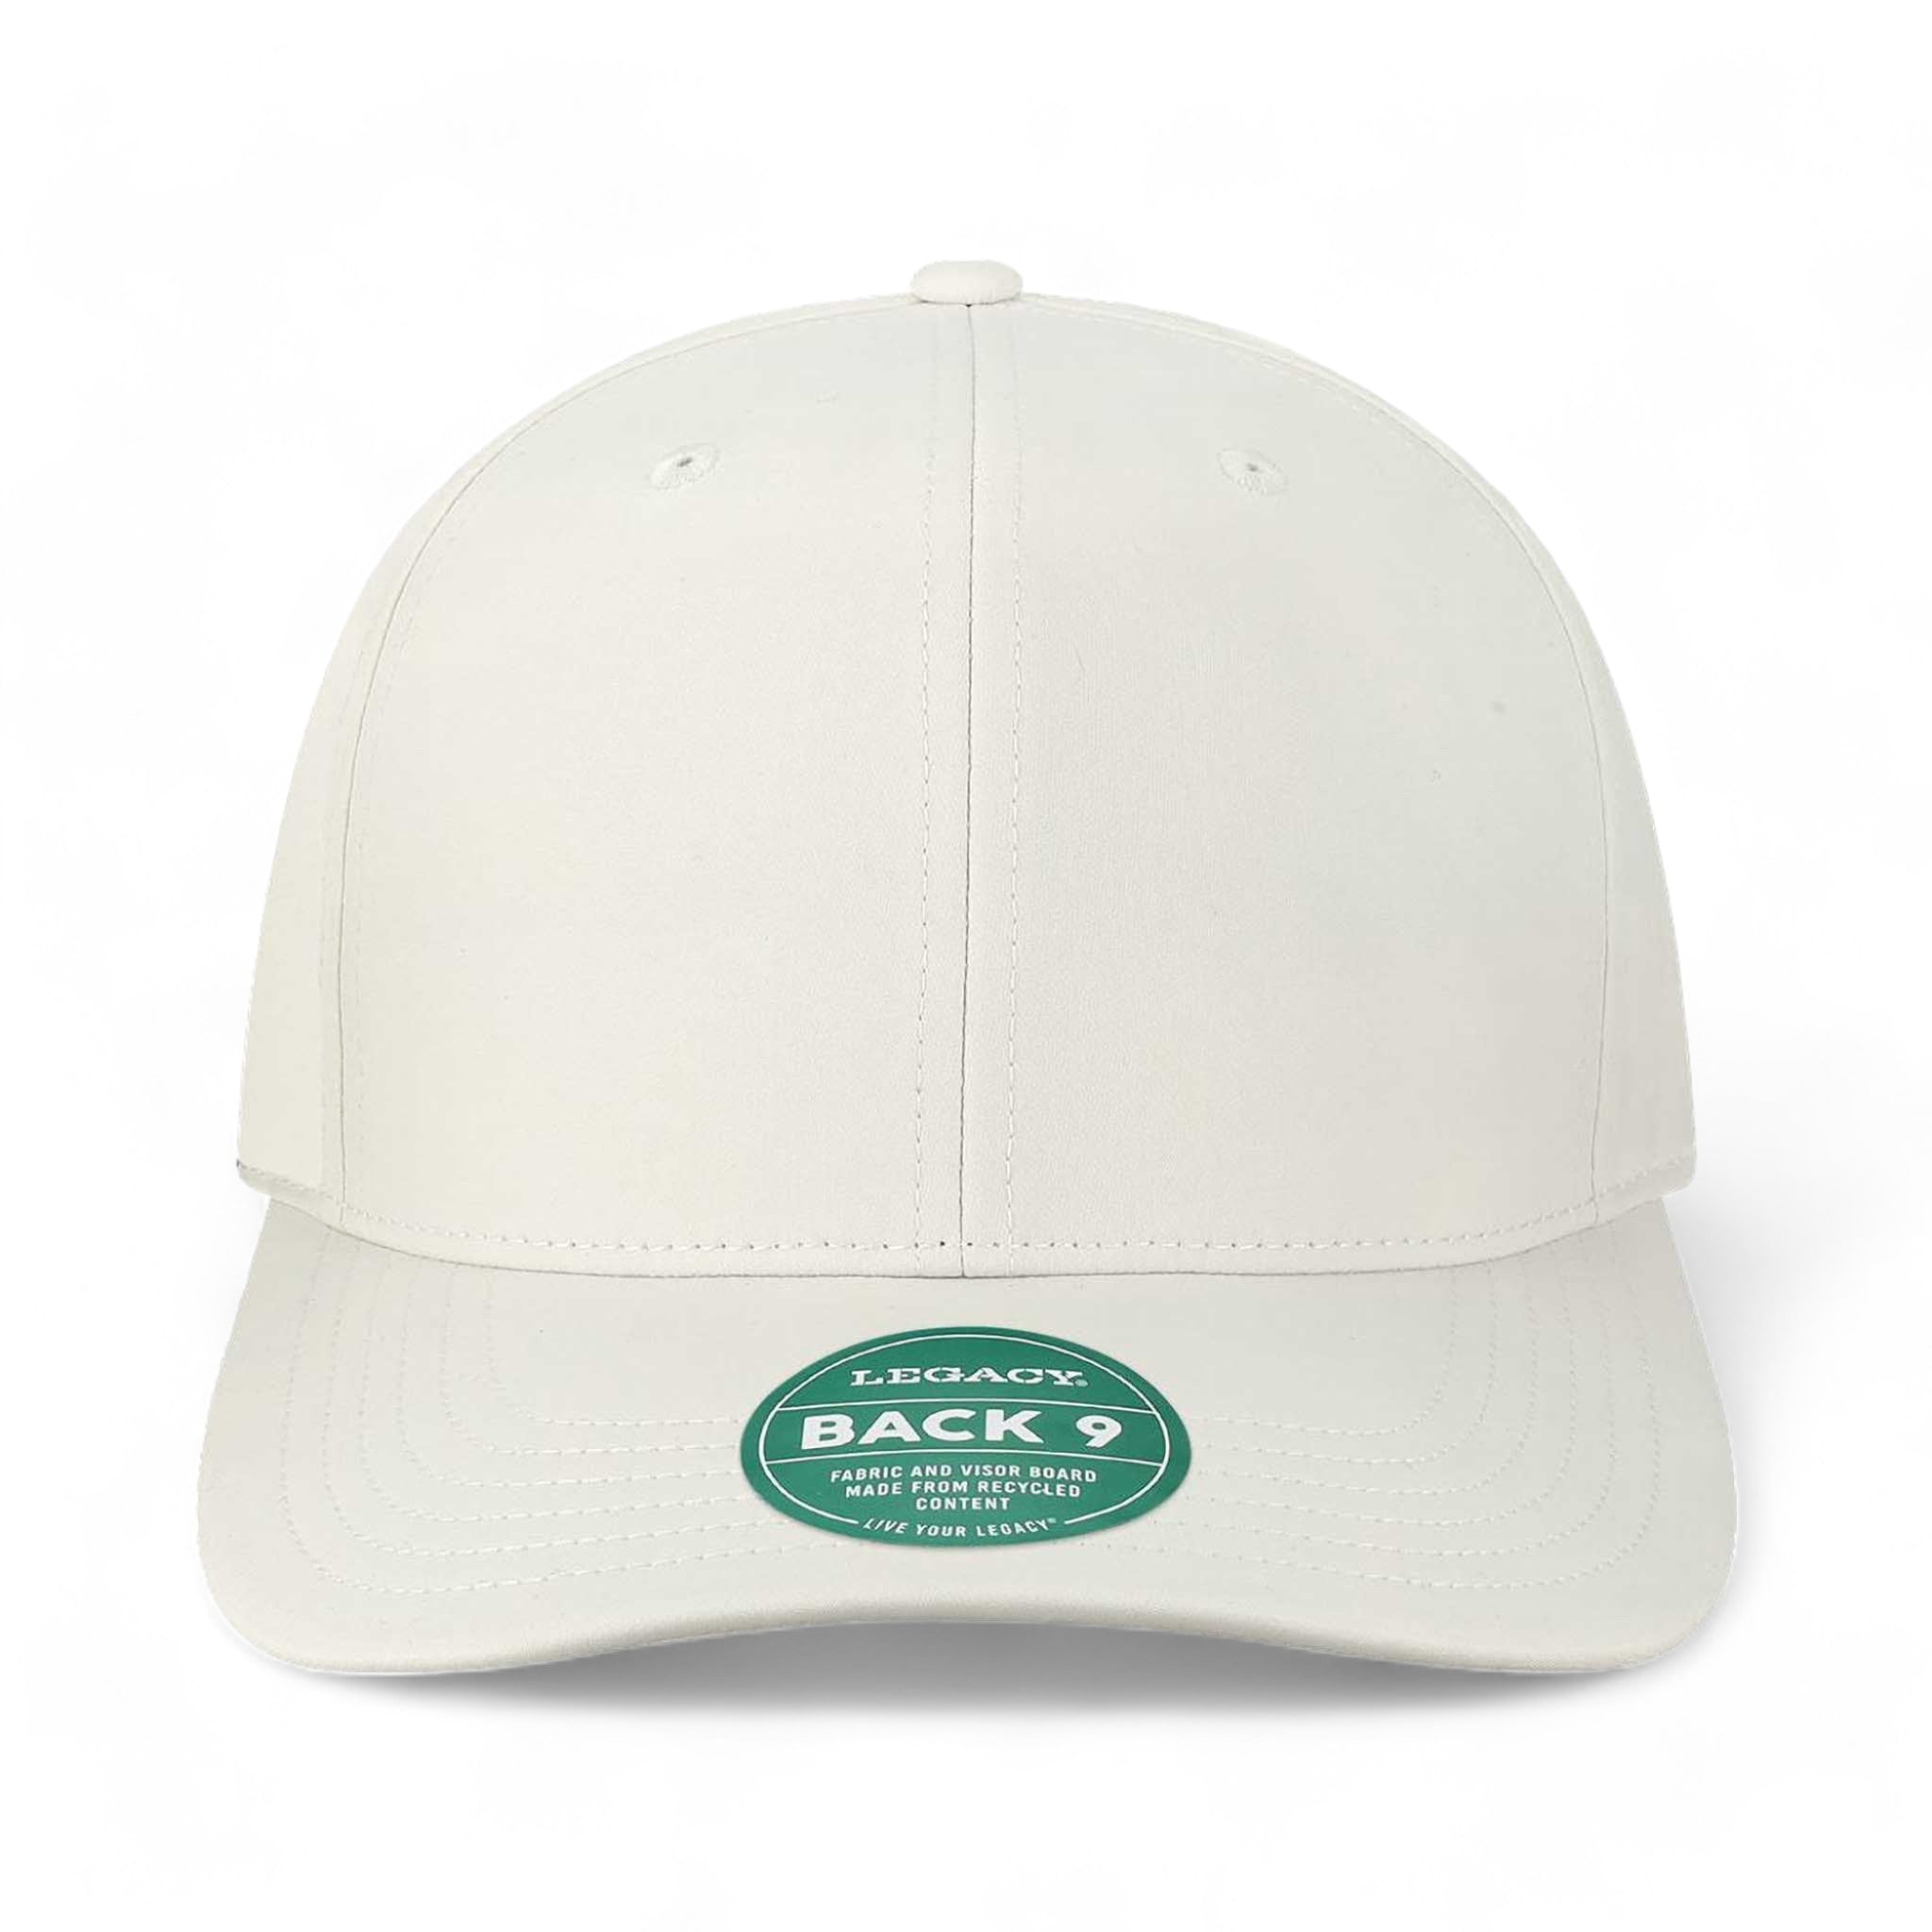 Front view of LEGACY B9A custom hat in white